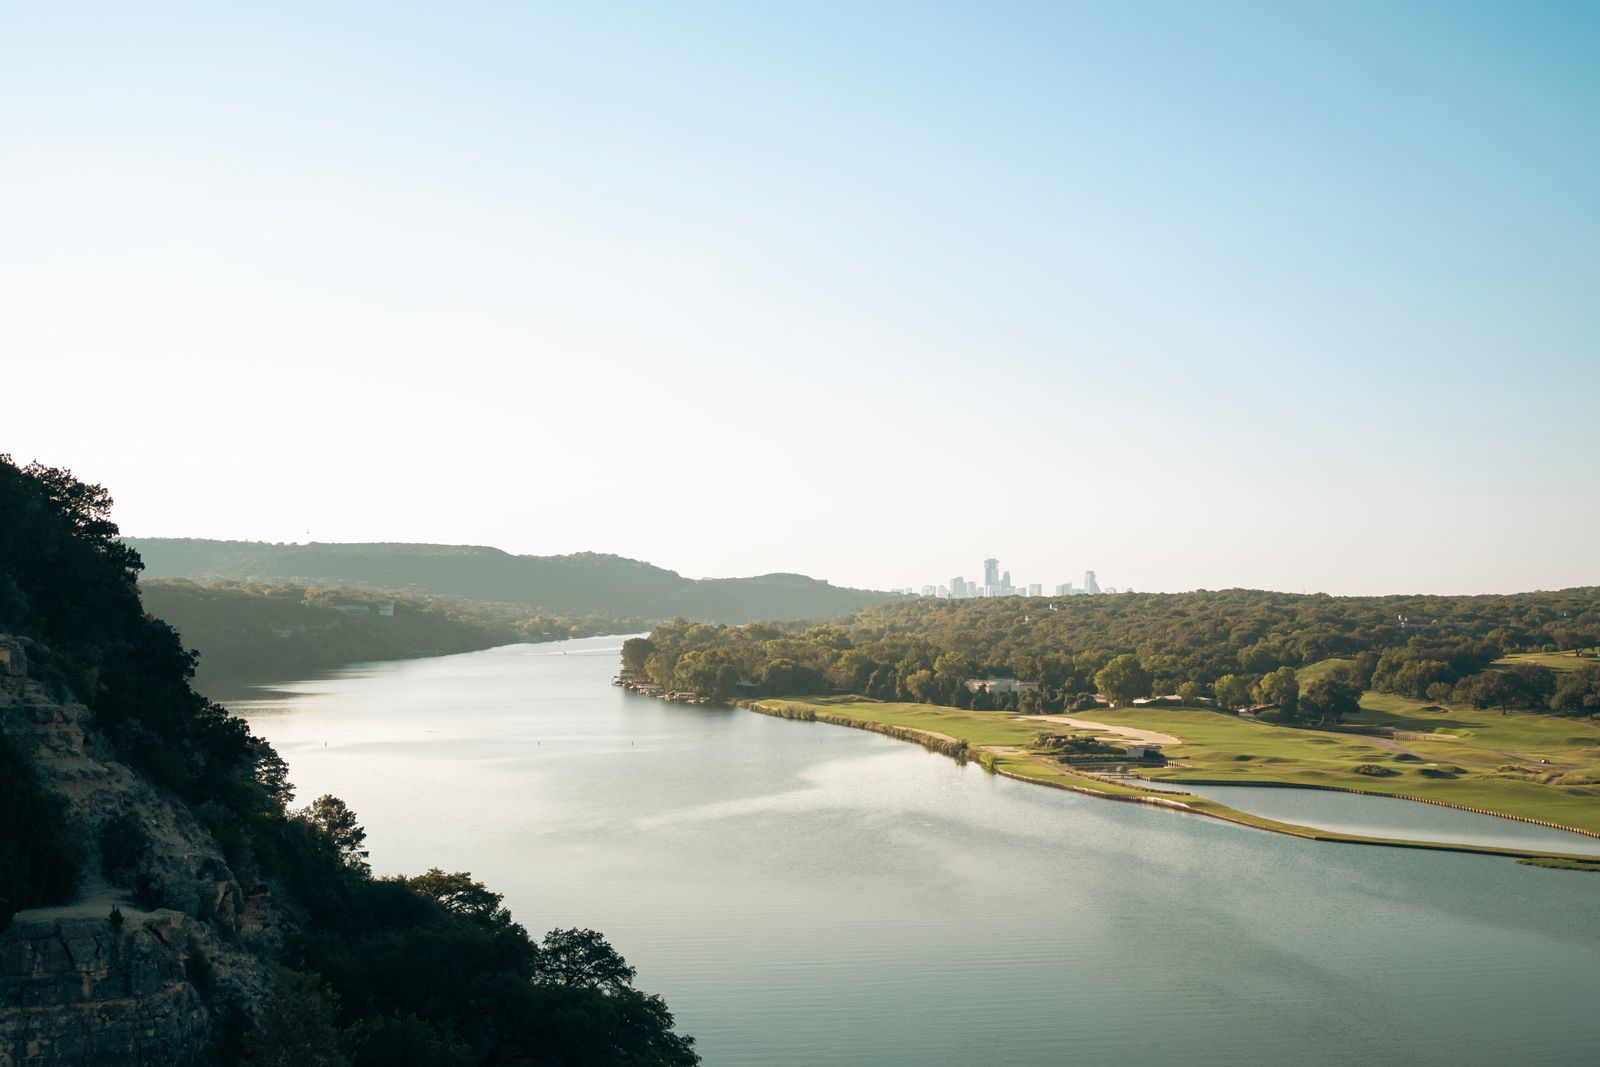 A river winding through trees, eventually leading to downtown Austin in the distance